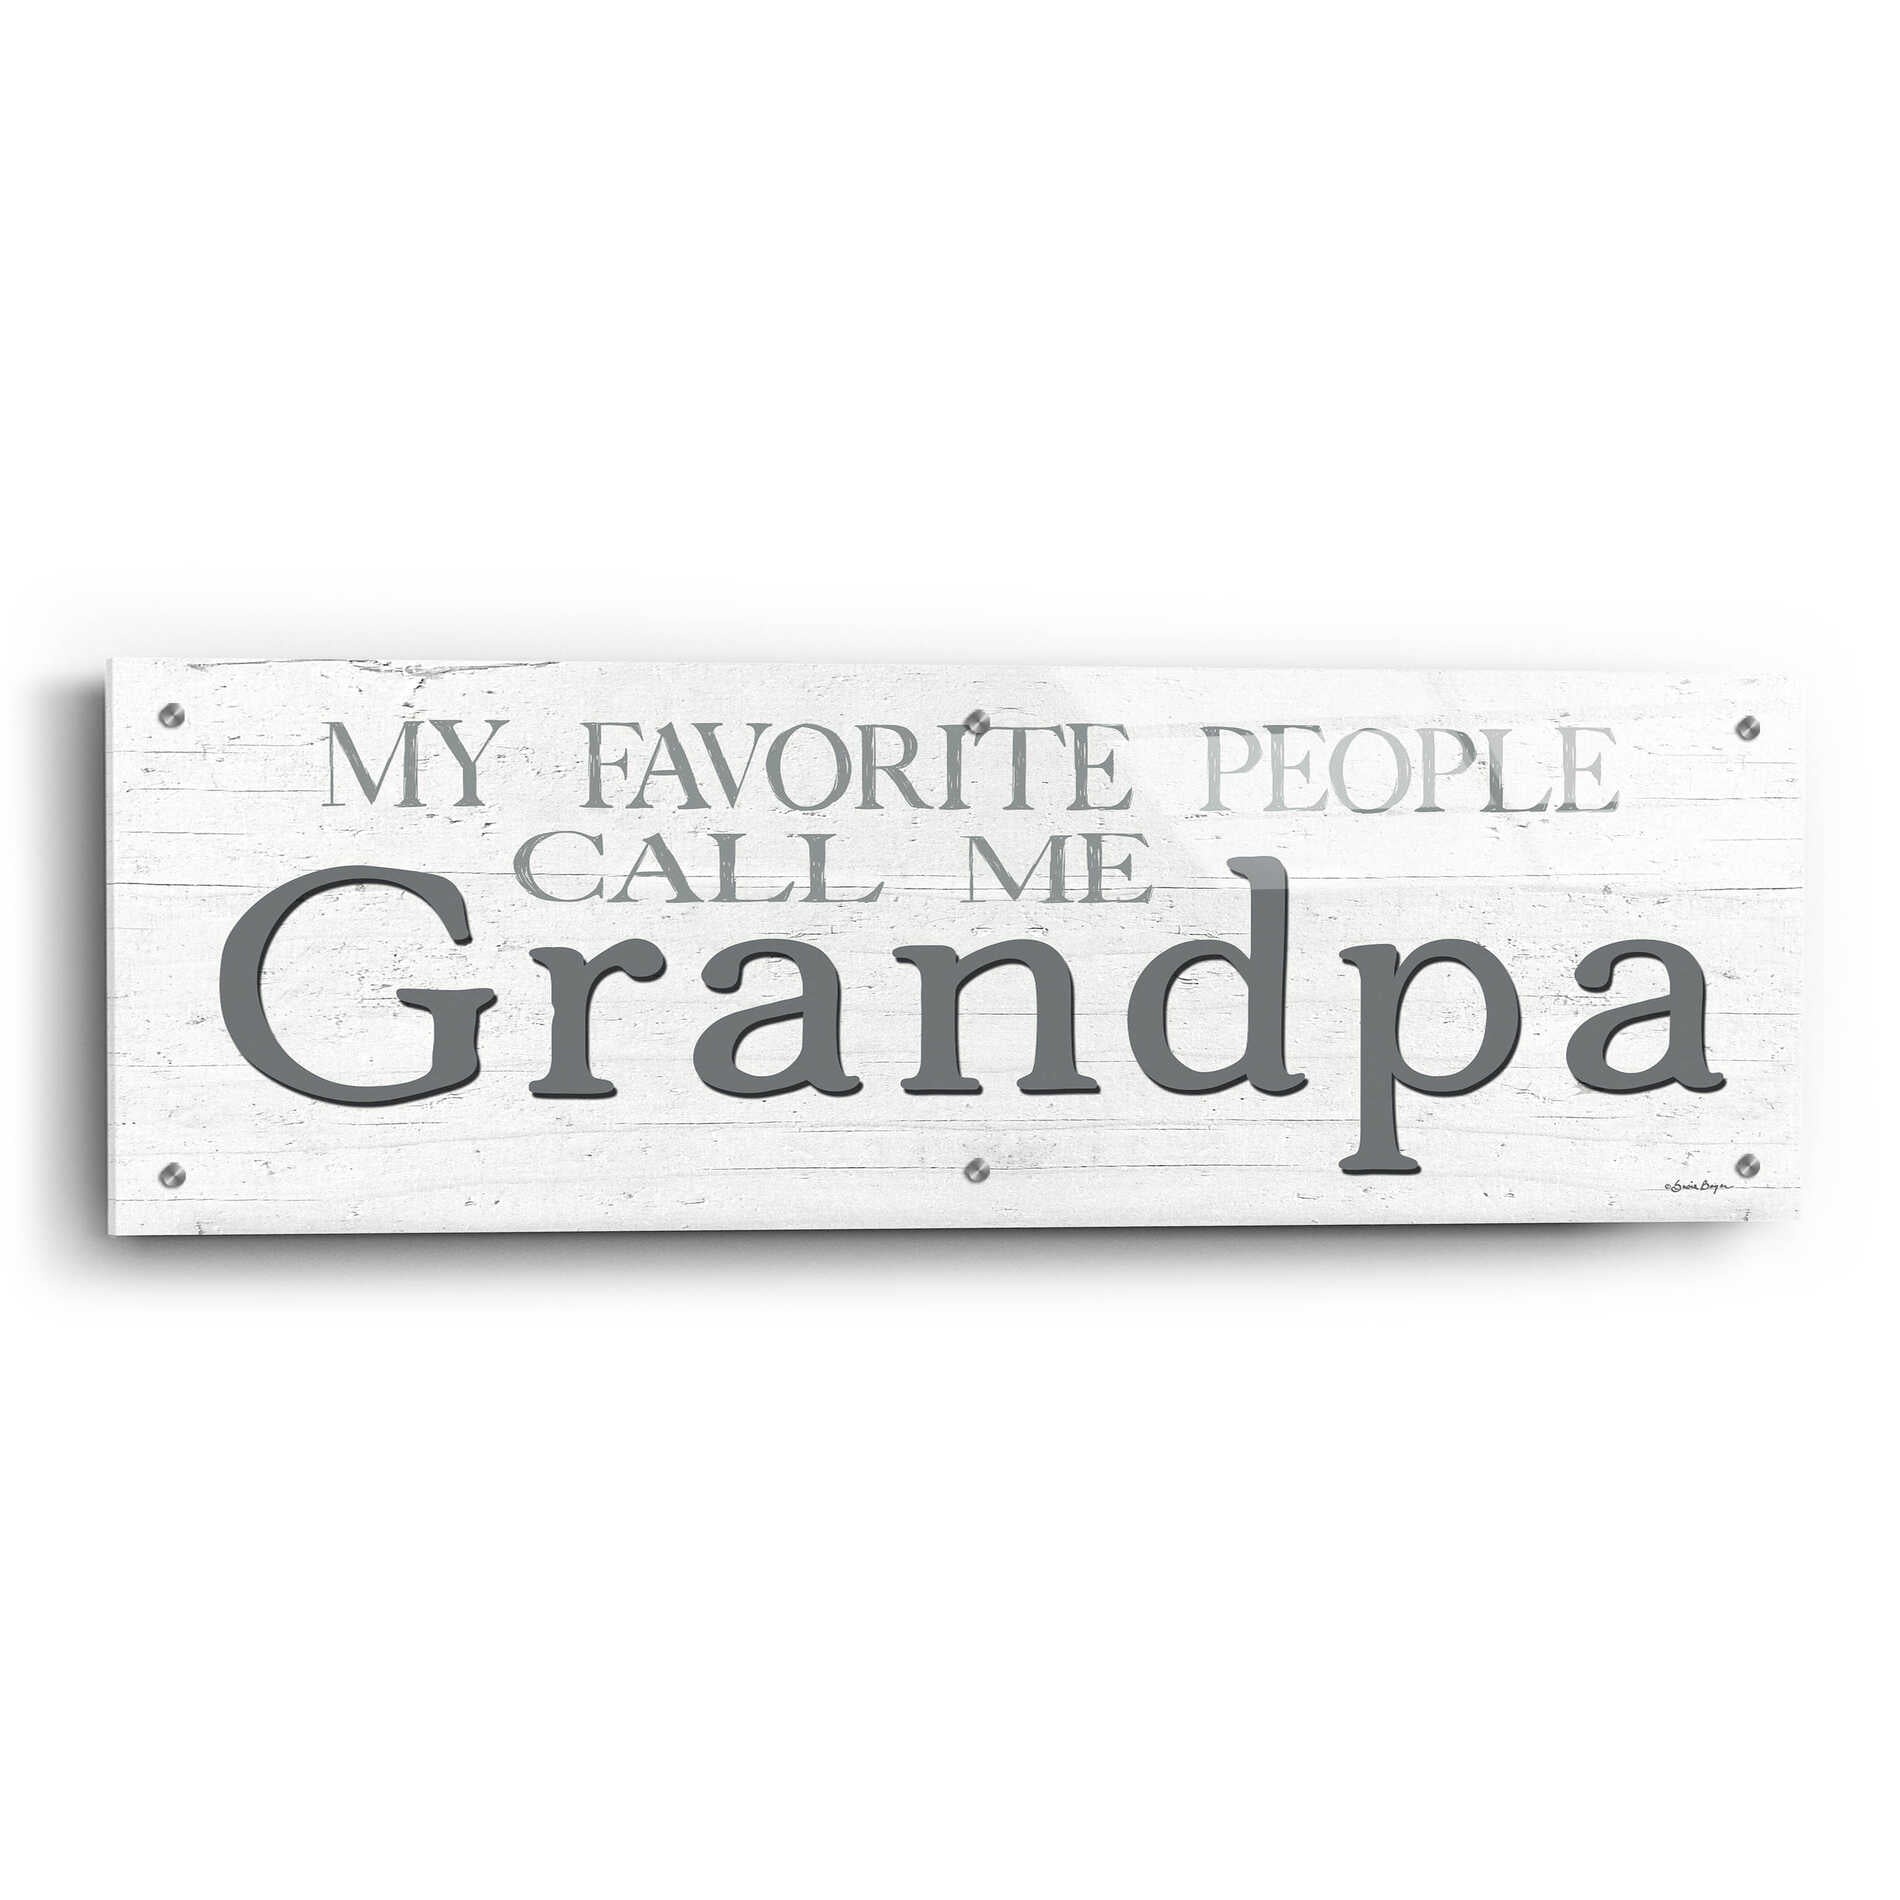 Epic Art 'My Favorite People Call Me Grandpa' by Susie Boyer, Acrylic Glass Wall Art,36x12